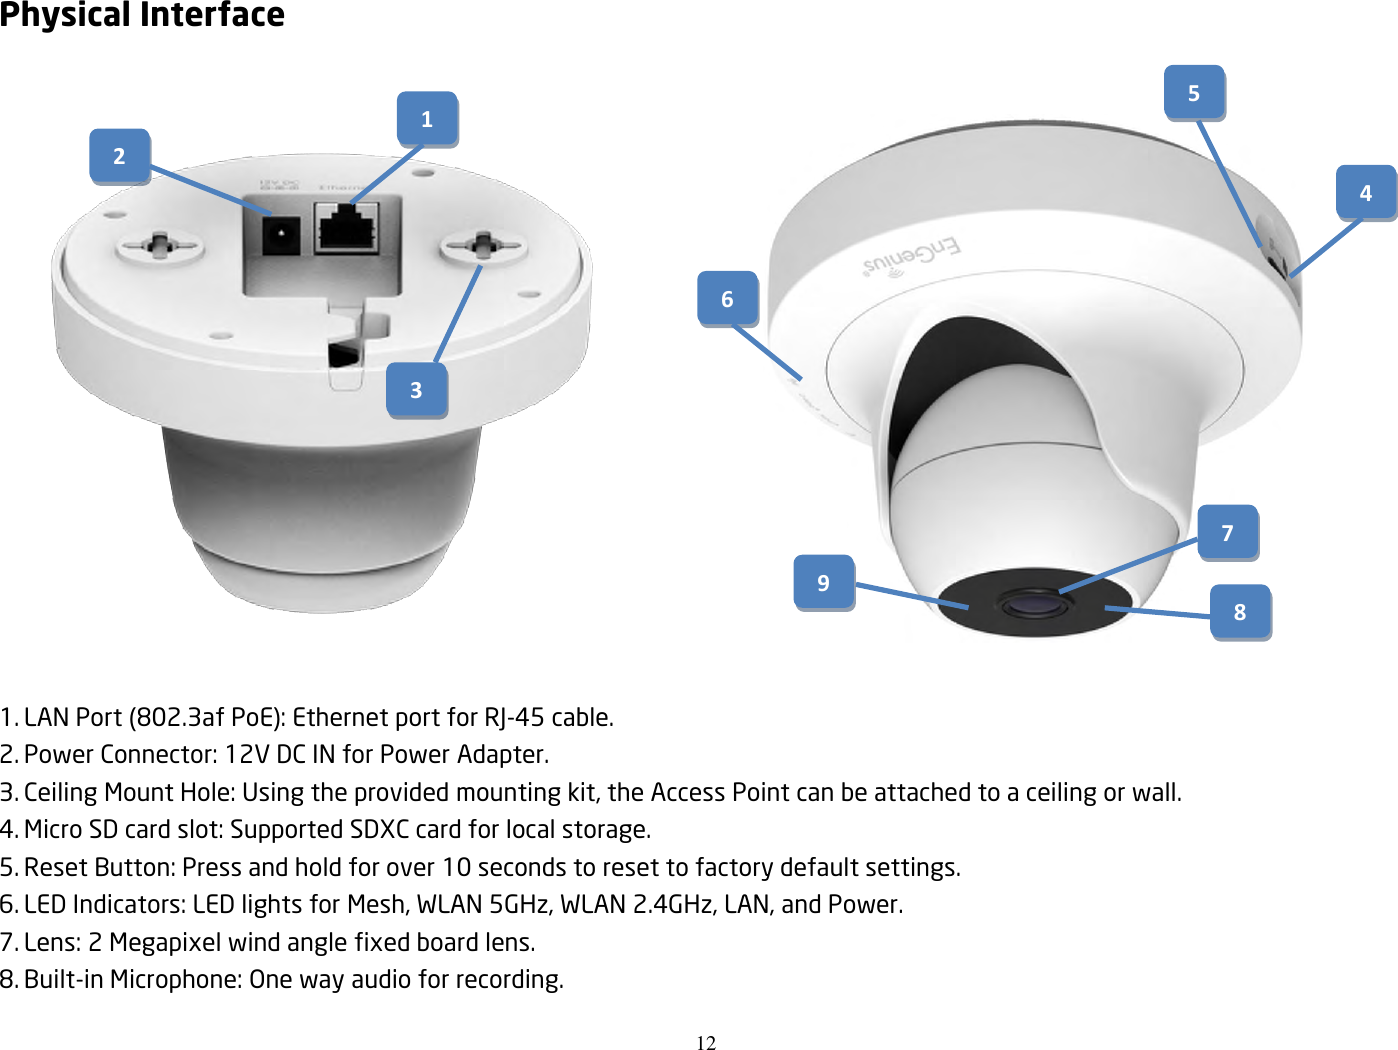 12  Physical Interface                      1. LAN Port (802.3af PoE): Ethernet port for RJ-45 cable. 2. Power Connector: 12V DC IN for Power Adapter. 3. Ceiling Mount Hole: Using the provided mounting kit, the Access Point can be attached to a ceiling or wall. 4. Micro SD card slot: Supported SDXC card for local storage. 5. Reset Button: Press and hold for over 10 seconds to reset to factory default settings. 6. LED Indicators: LED lights for Mesh, WLAN 5GHz, WLAN 2.4GHz, LAN, and Power. 7. Lens: 2 Megapixel wind angle fixed board lens. 8. Built-in Microphone: One way audio for recording. 1  2 3 4  5  6  9  7  8  